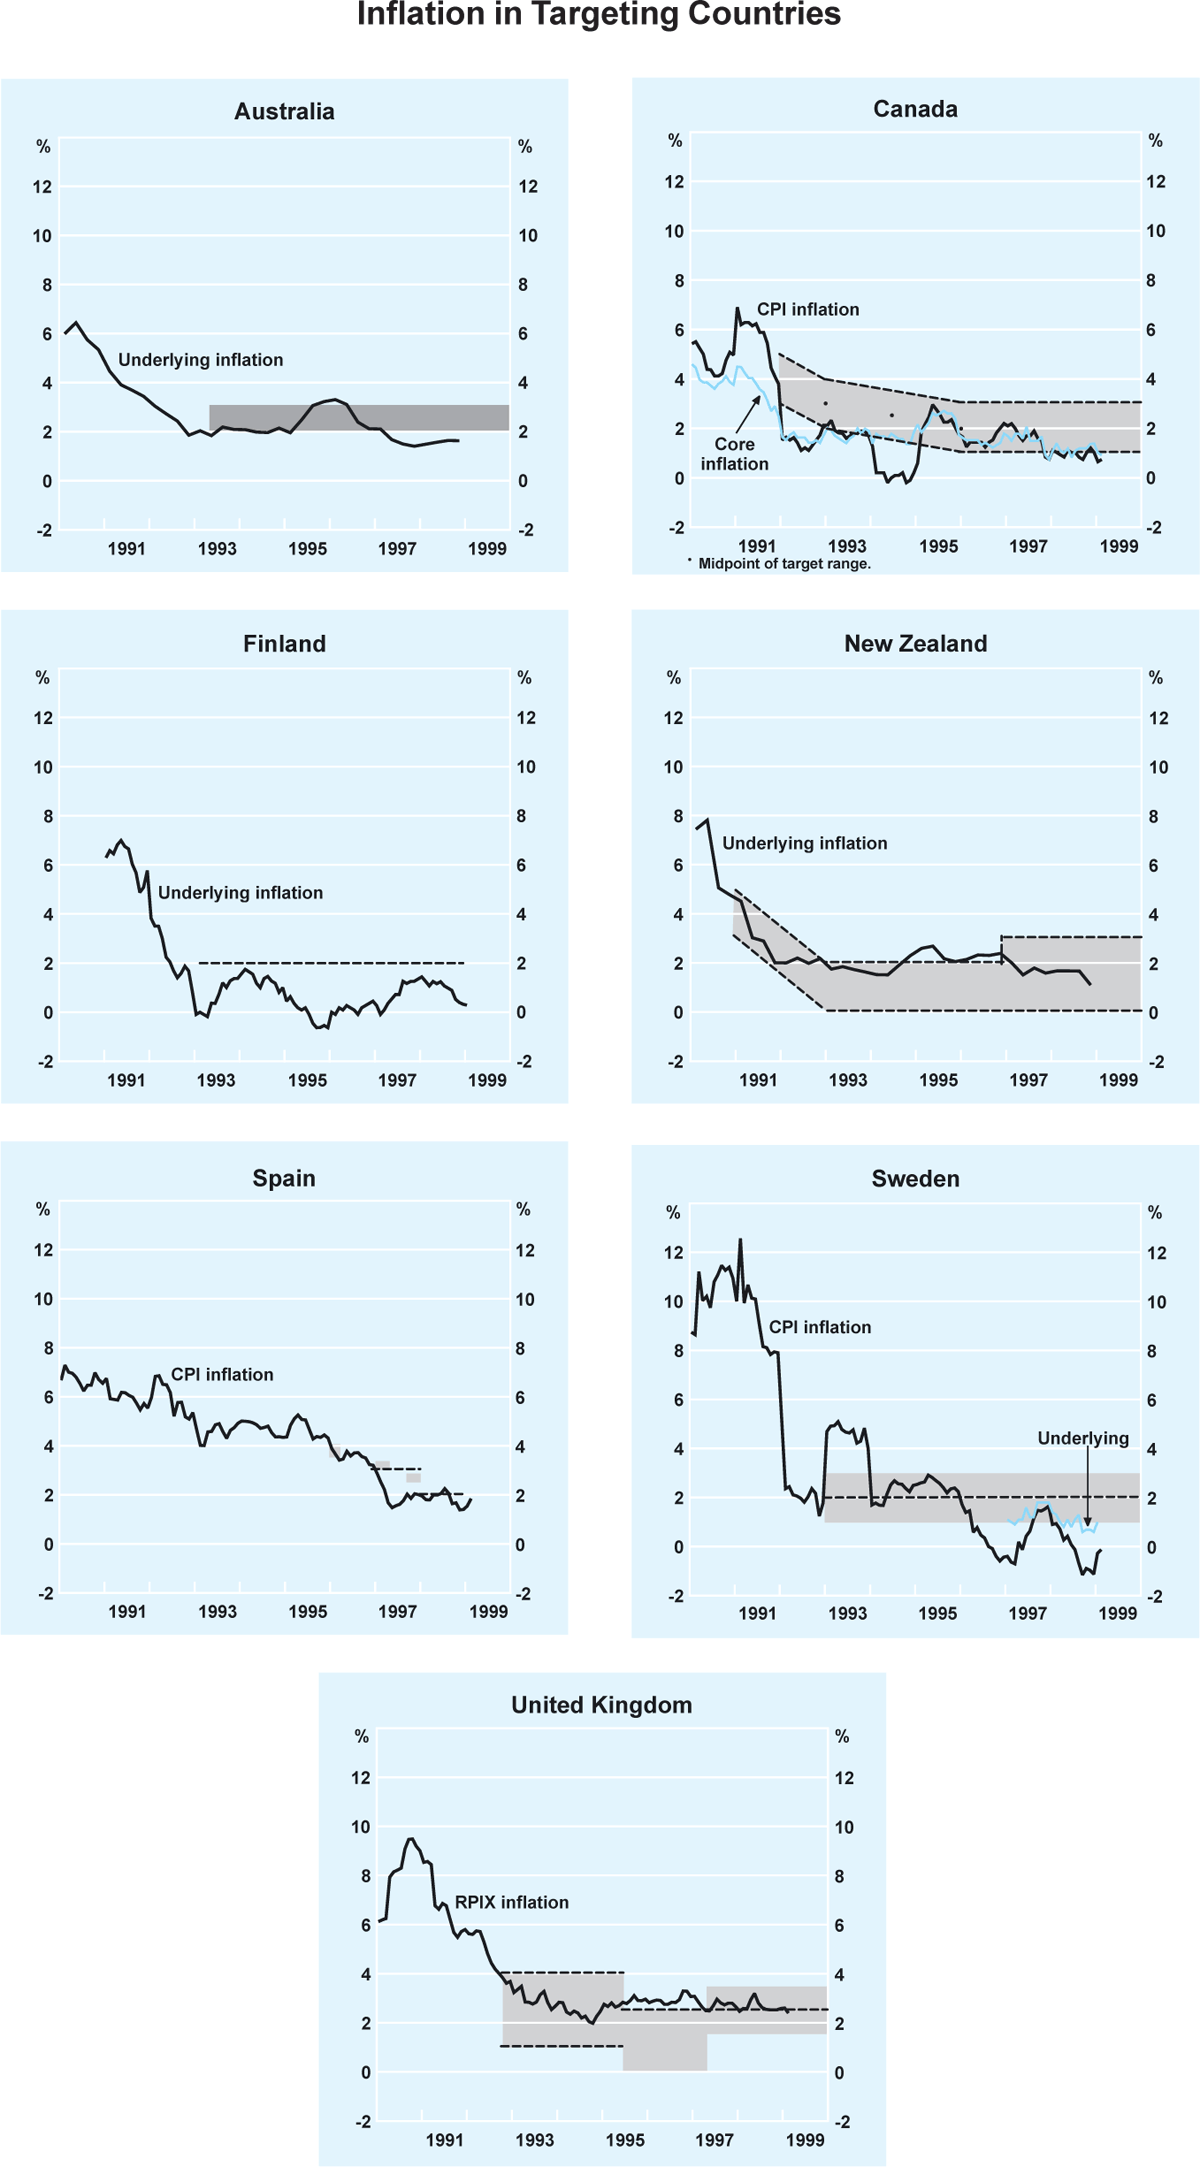 Graph 2: Inflation in Targeting Countries